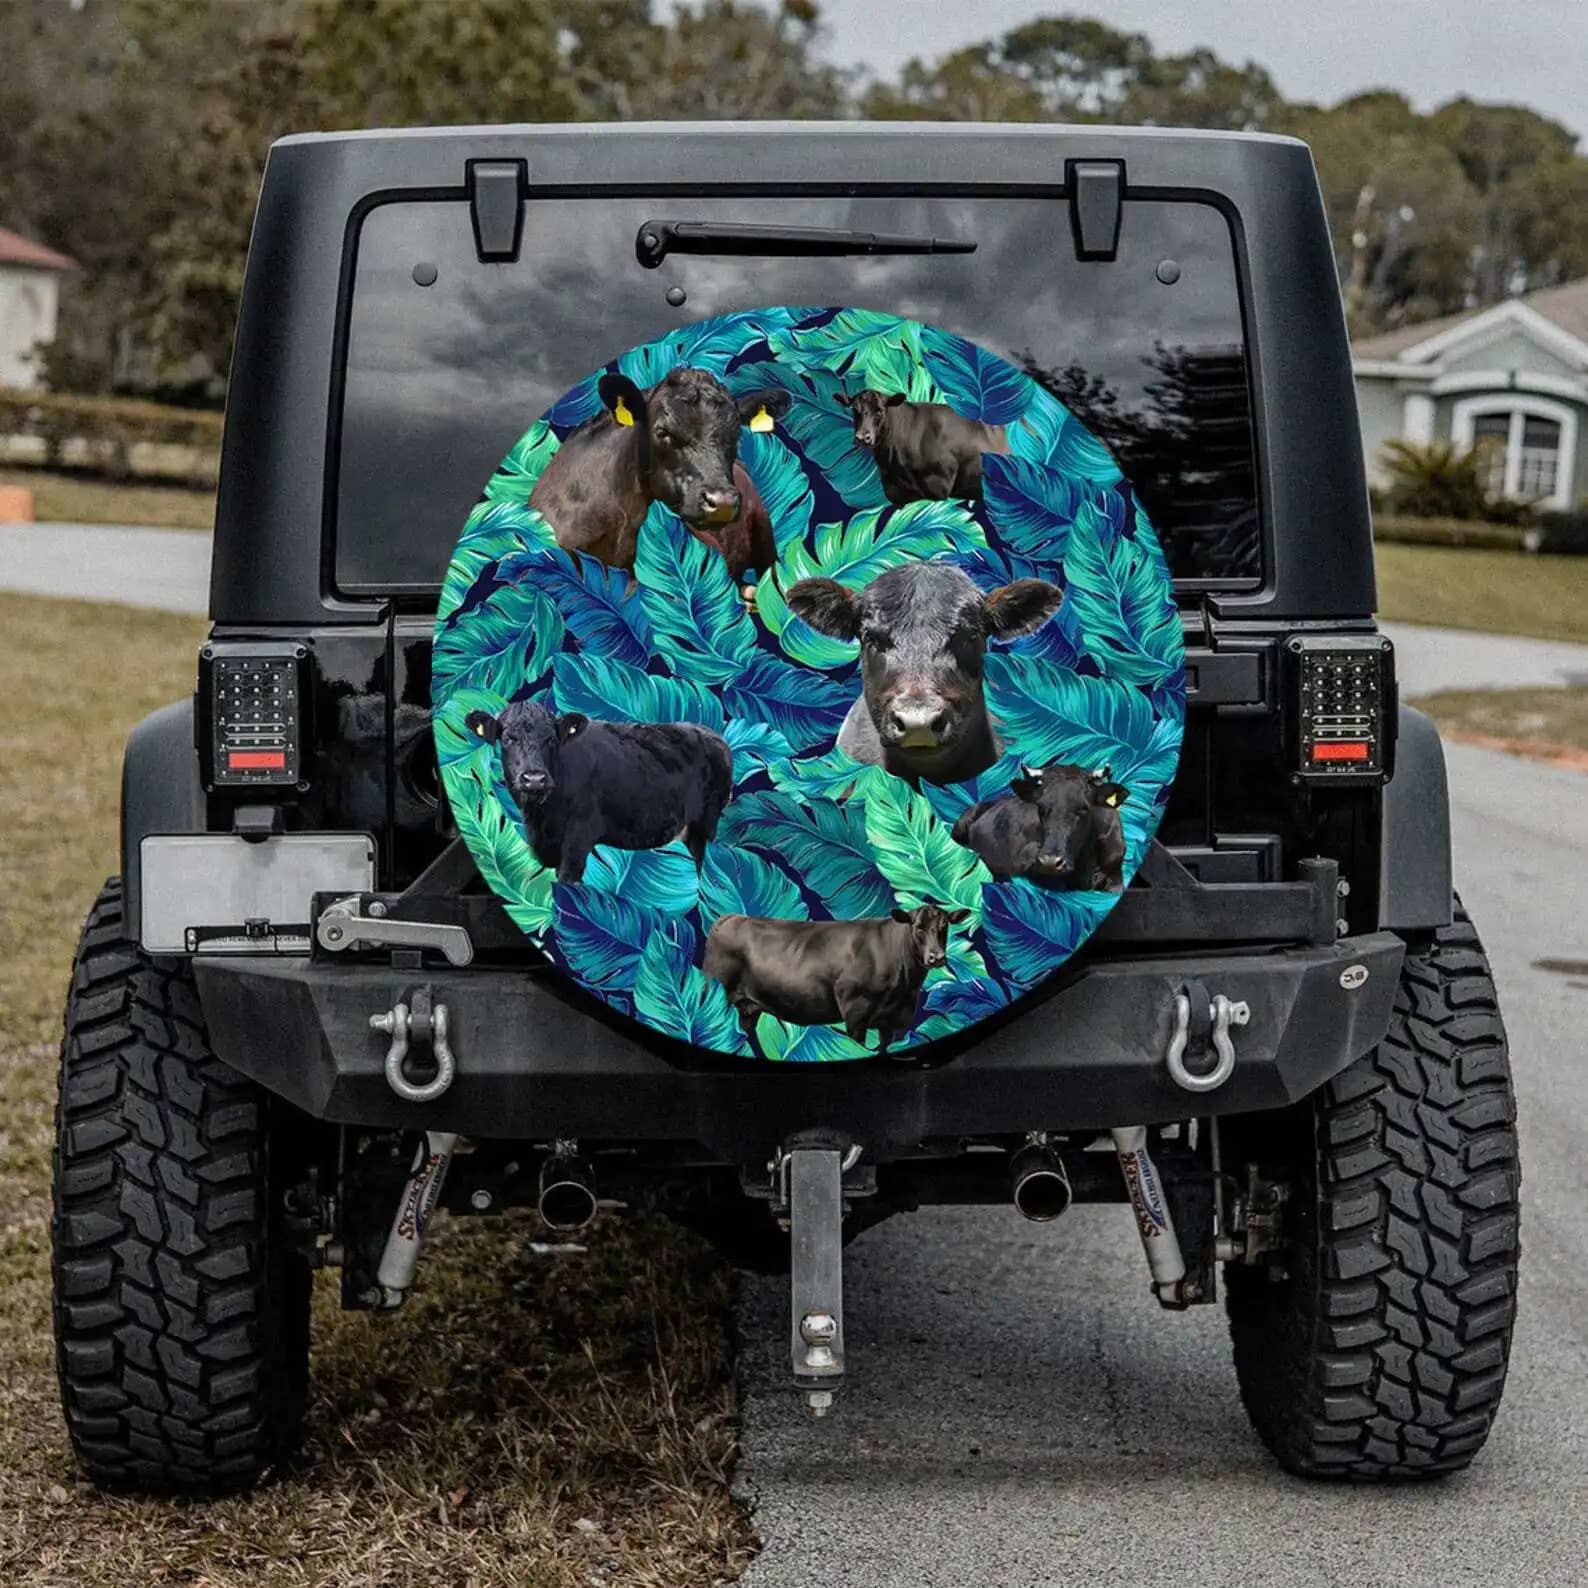 Tropical Cows Personalized Tire Cover